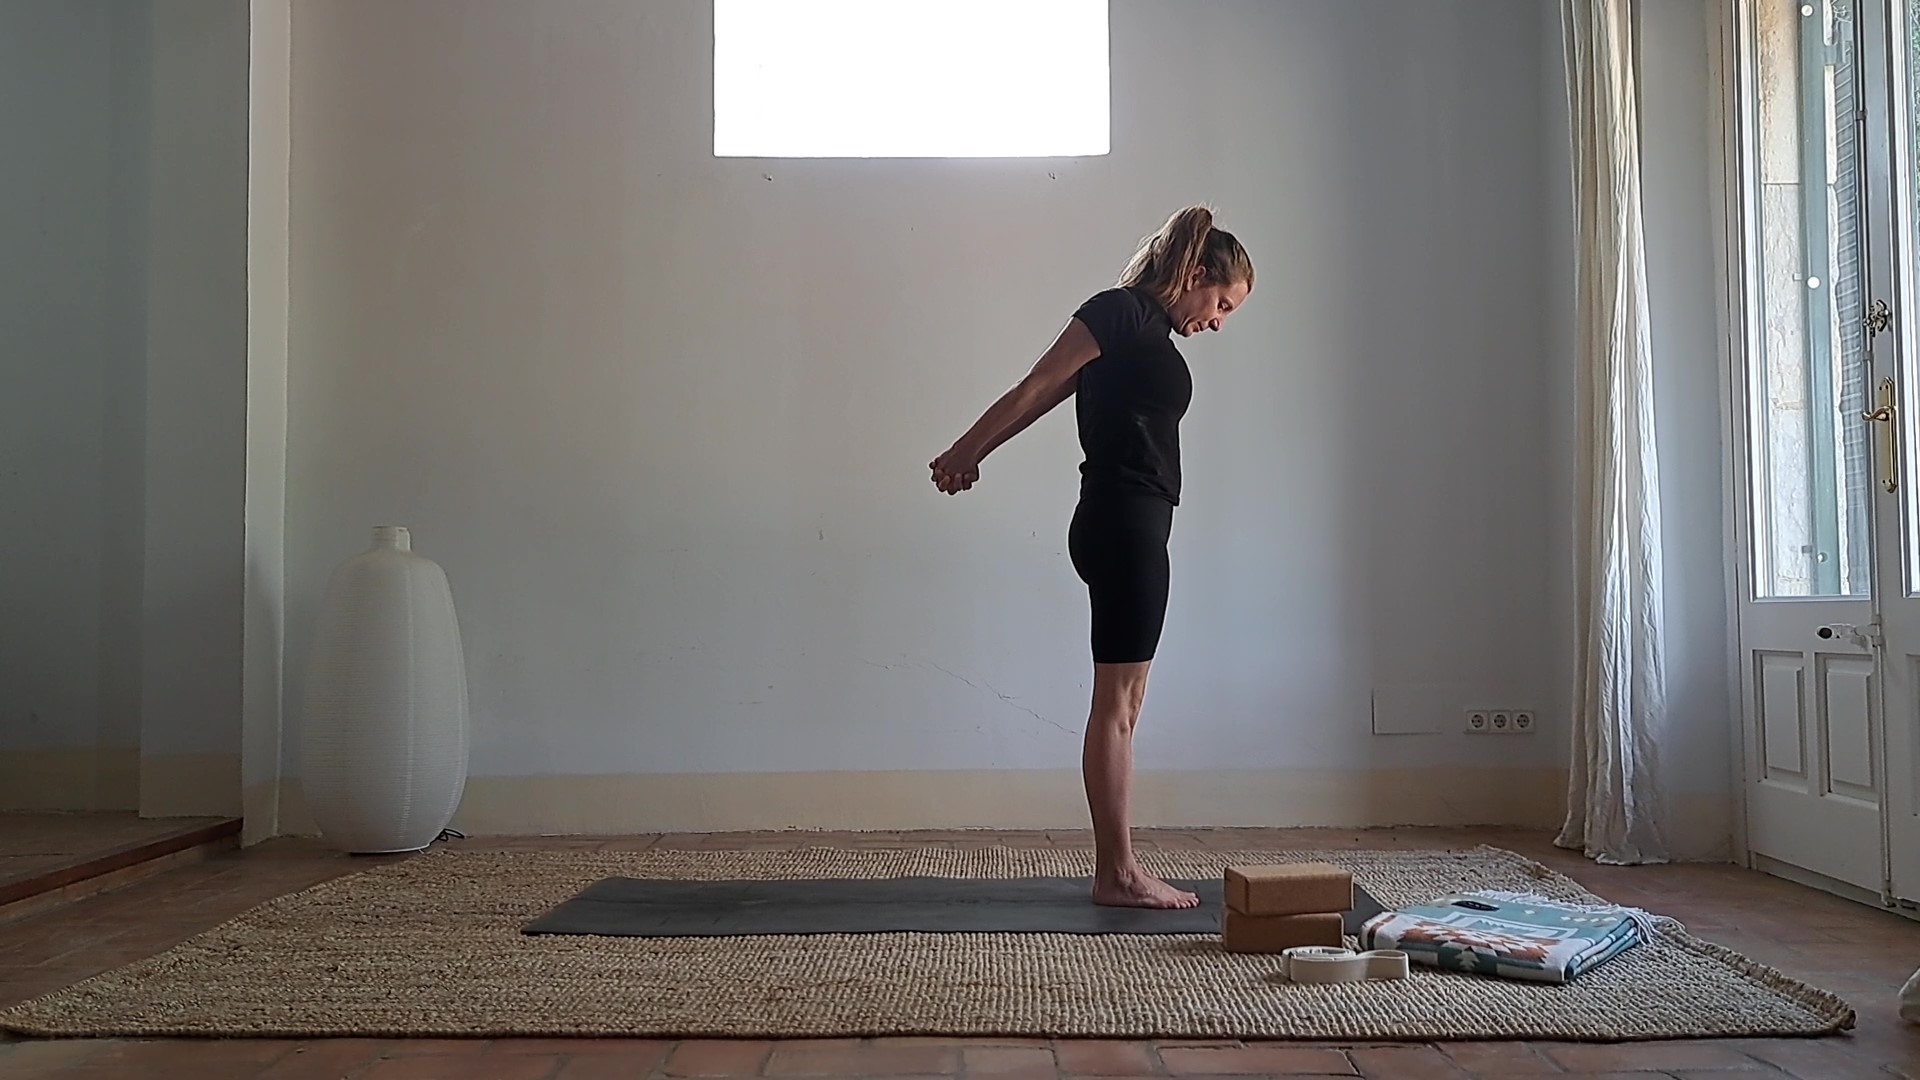 STANDING YOGA SEQUENCE: A Full Body Stretch for Beginners | Lucilehr.com